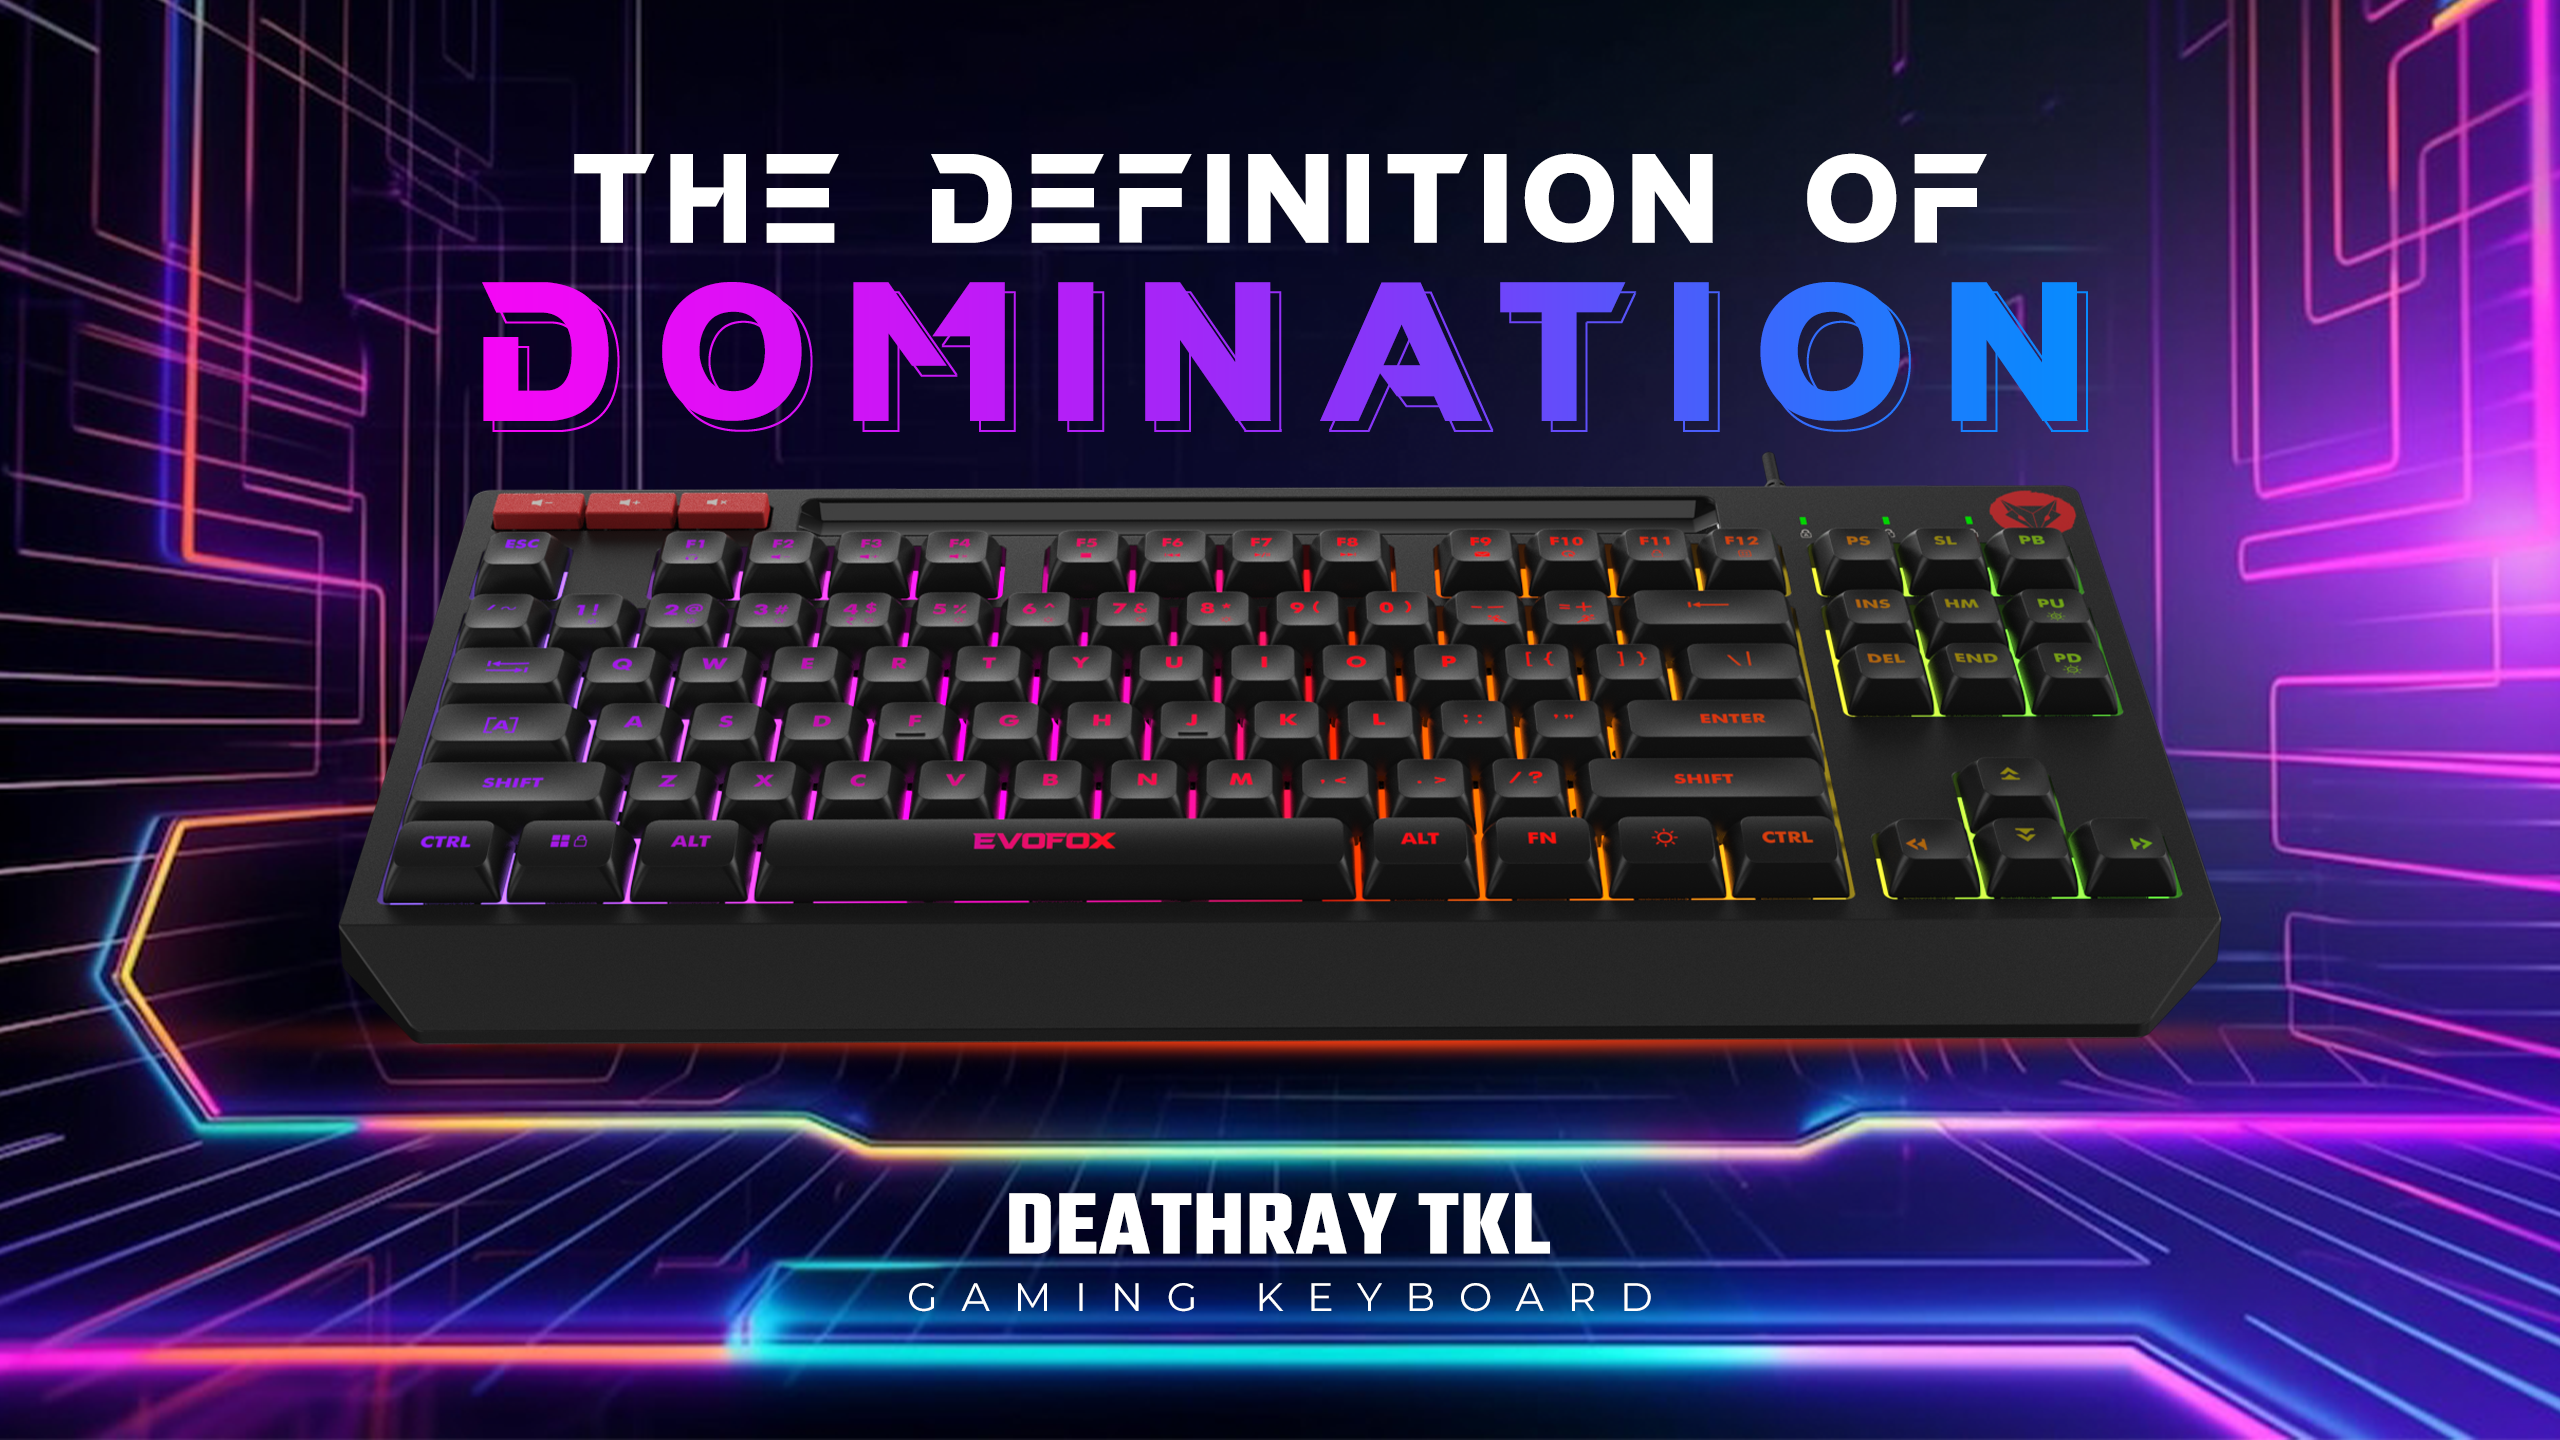 Immerse Yourself In-Game With the EvoFox Deathray TKL Gaming Keyboard